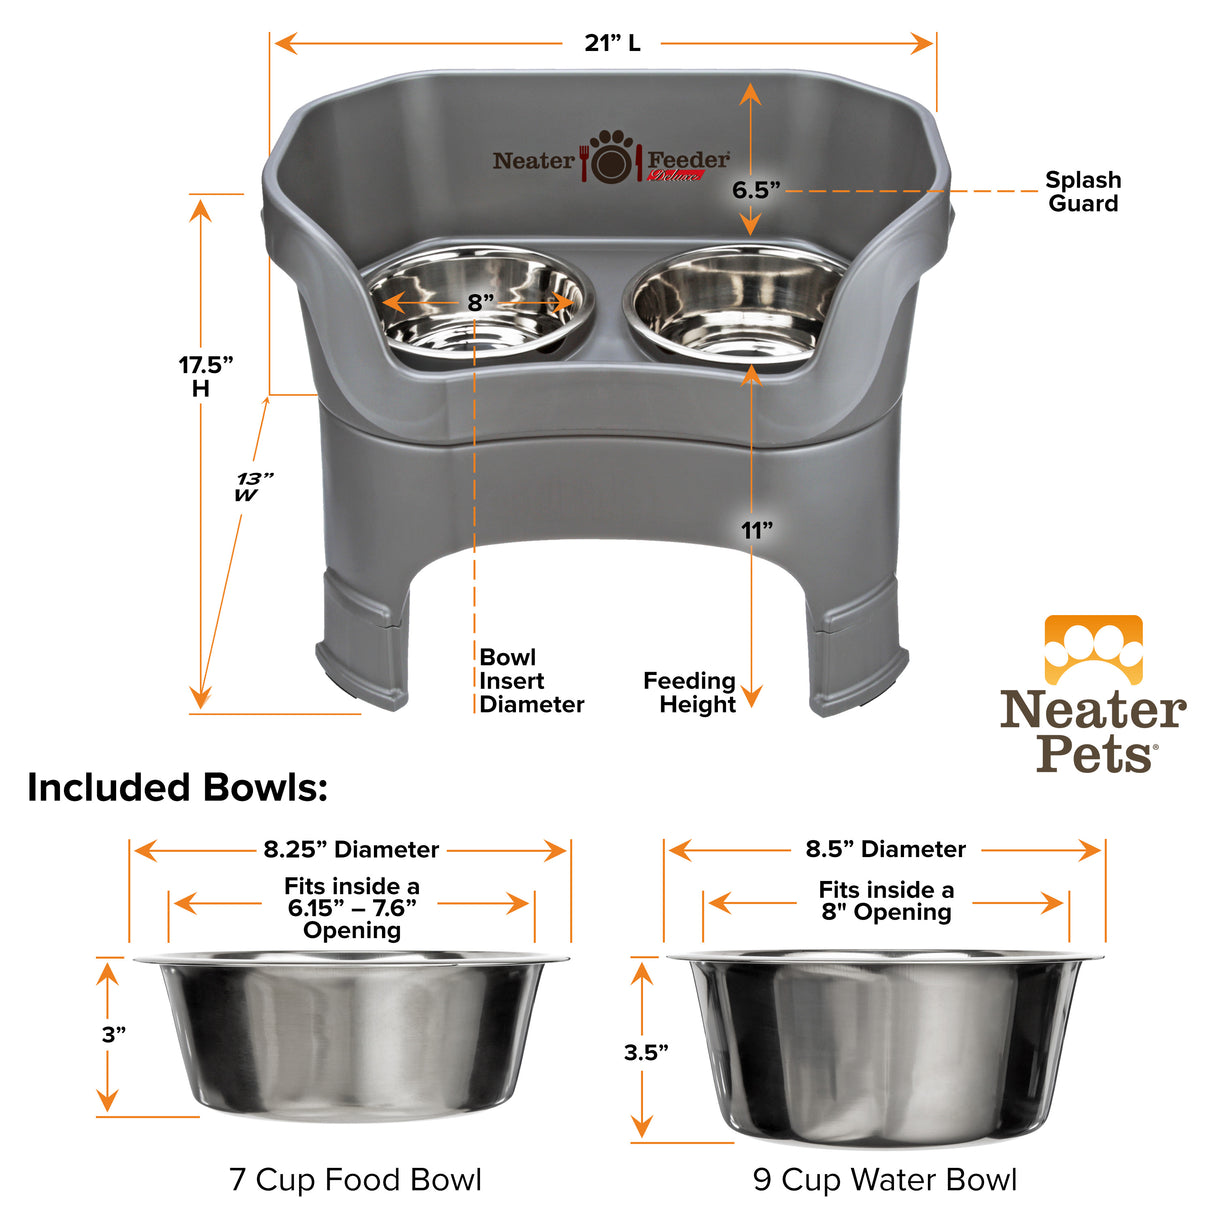 Deluxe large with leg extensions feeder and bowl dimensions